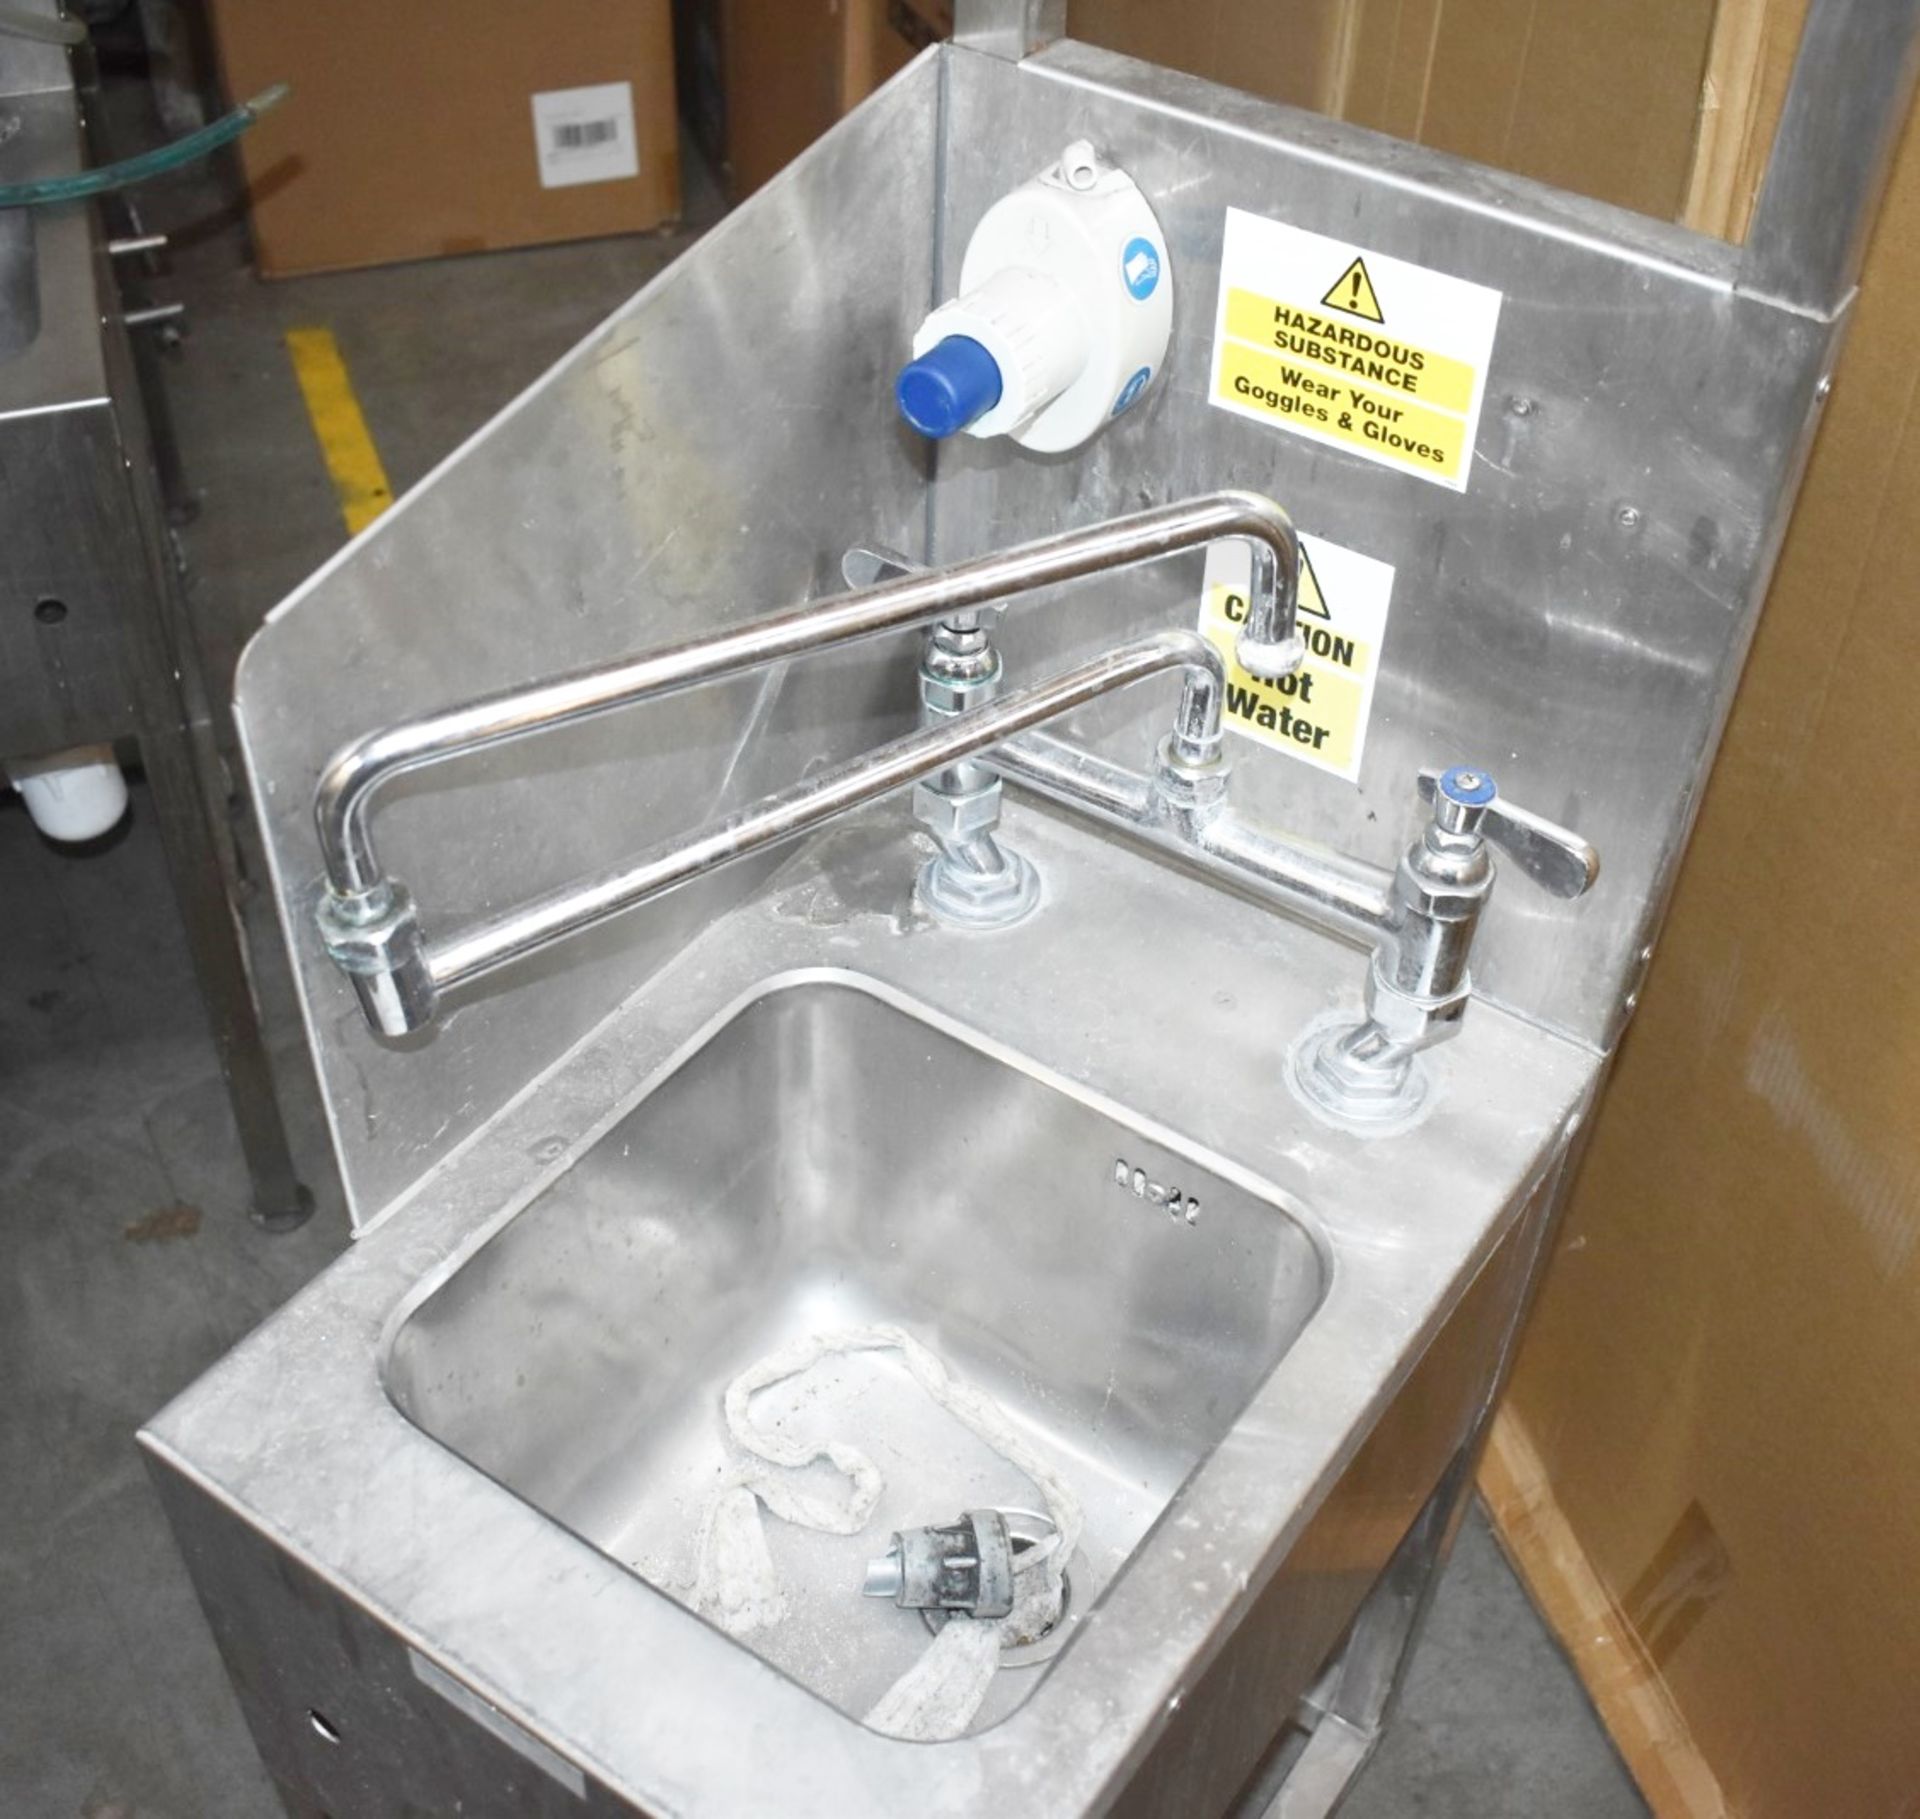 1 x Slim Janitorial Wash Station - Features Wash Bowl, Mop Hanger, Goggle Hook, Detergent Pump & Tap - Image 4 of 5